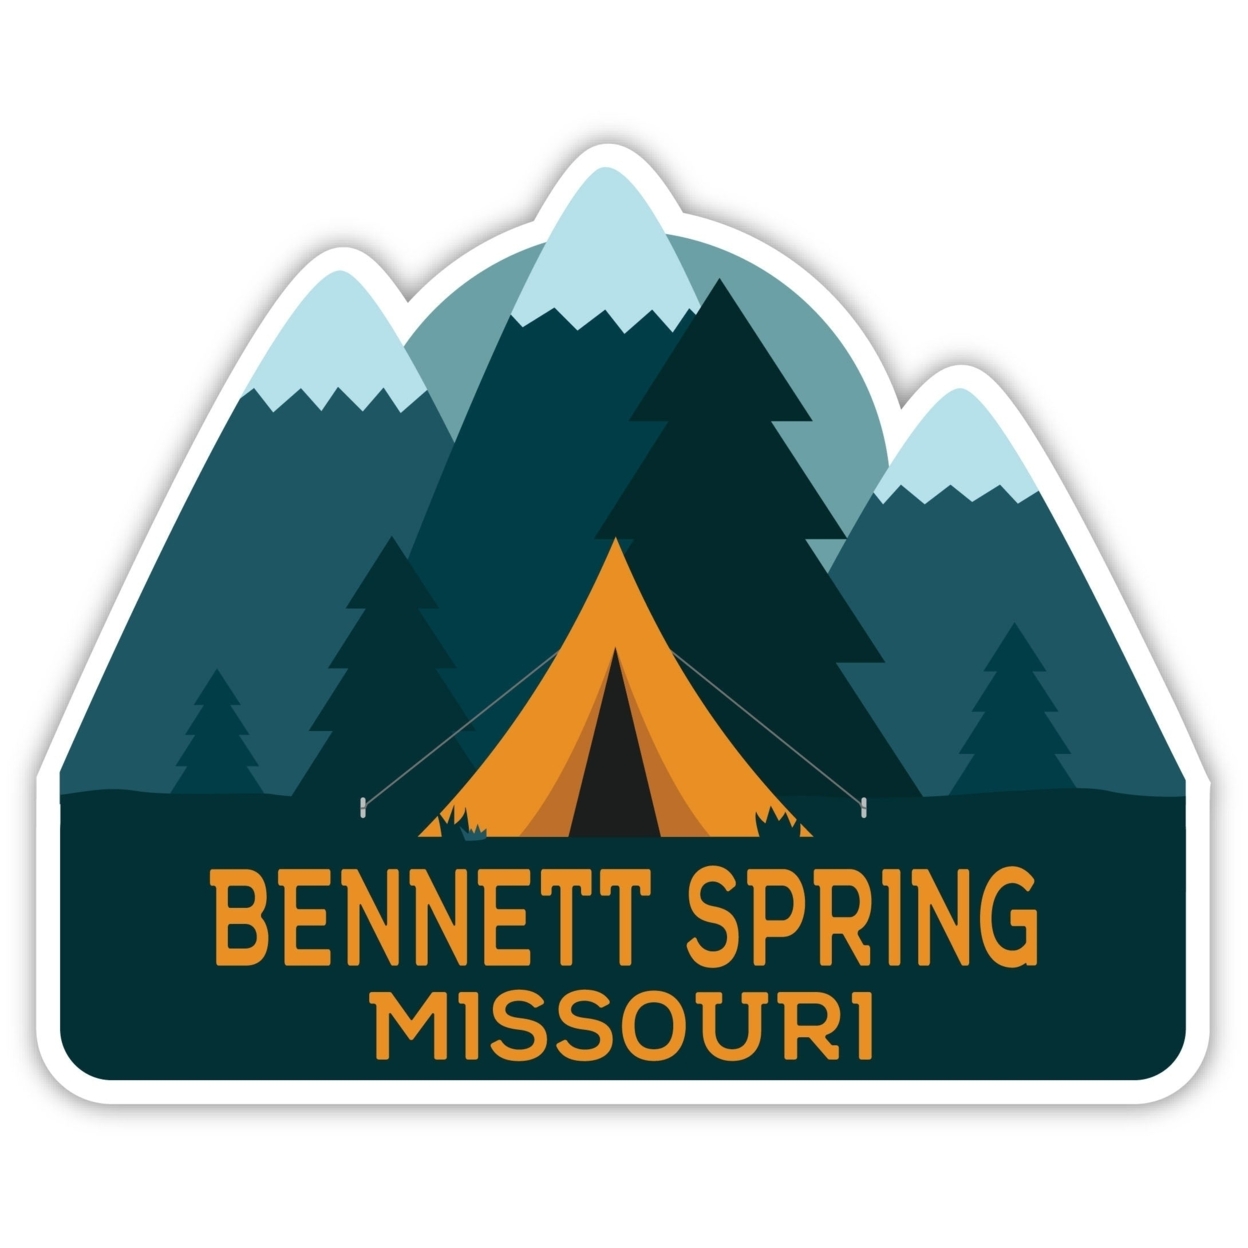 Bennett Spring Missouri Souvenir Decorative Stickers (Choose Theme And Size) - 4-Pack, 10-Inch, Tent